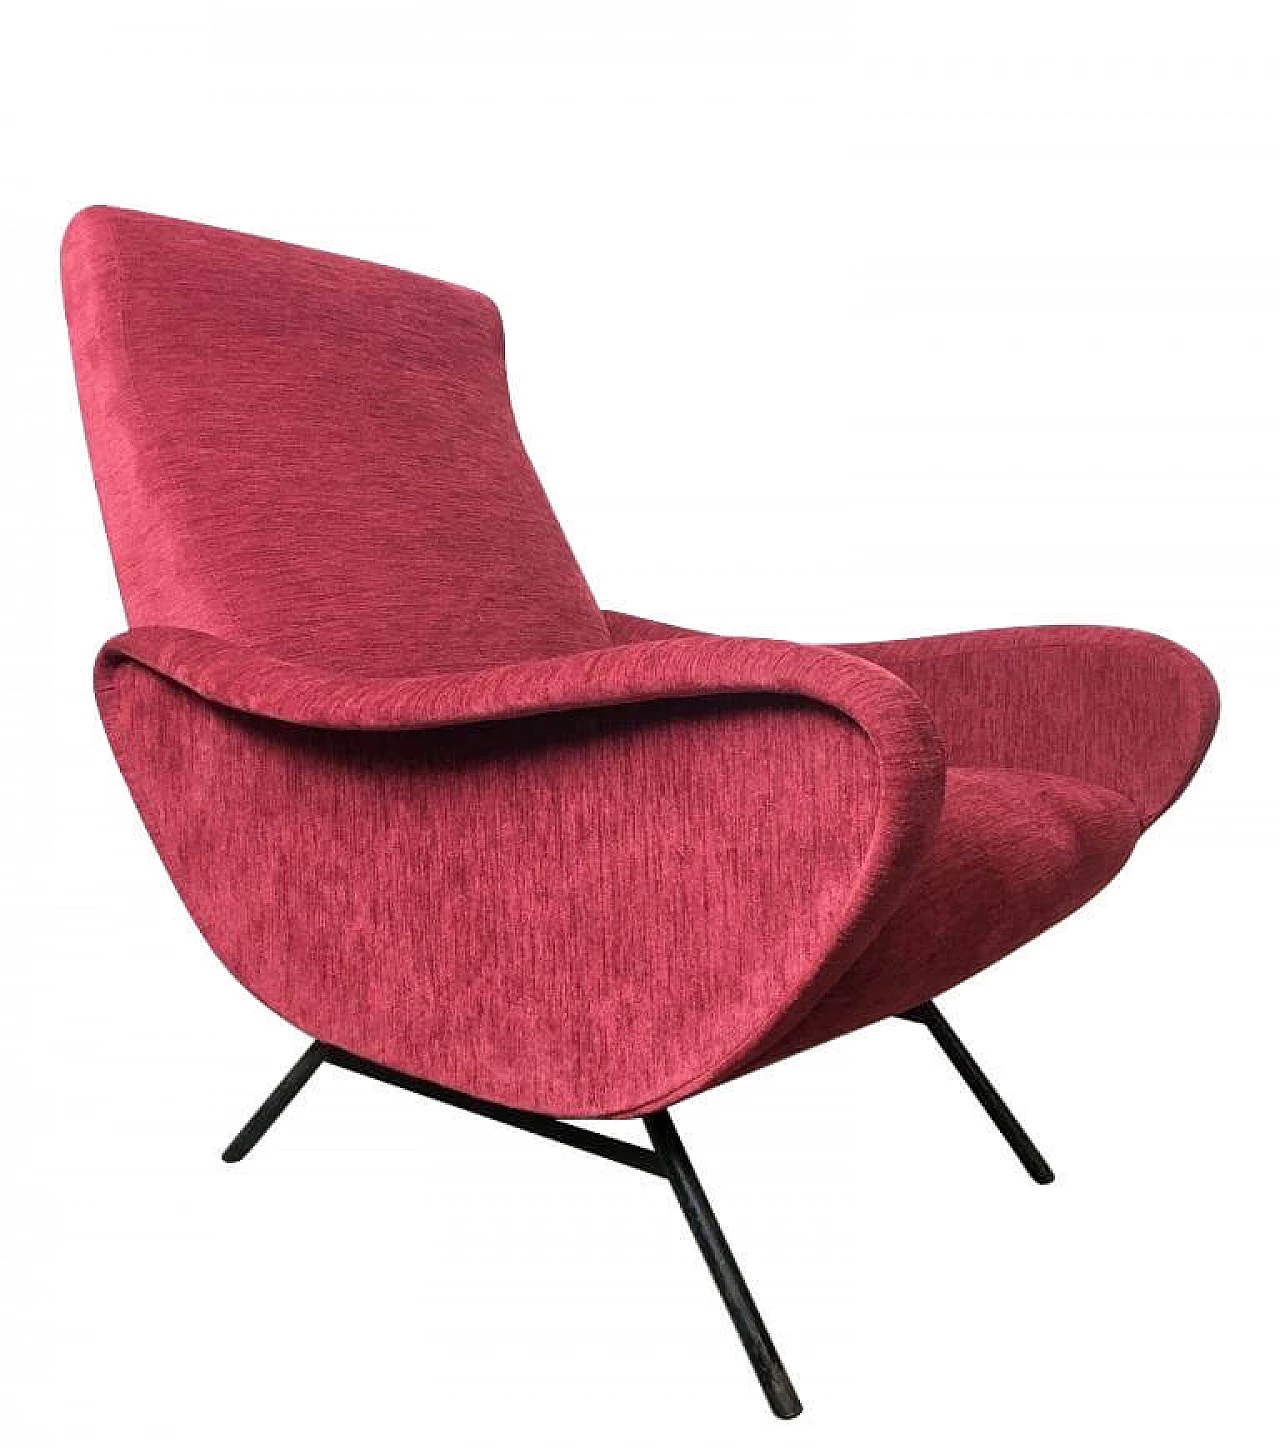 Lady style armchair in red fabric, 50s 1167035